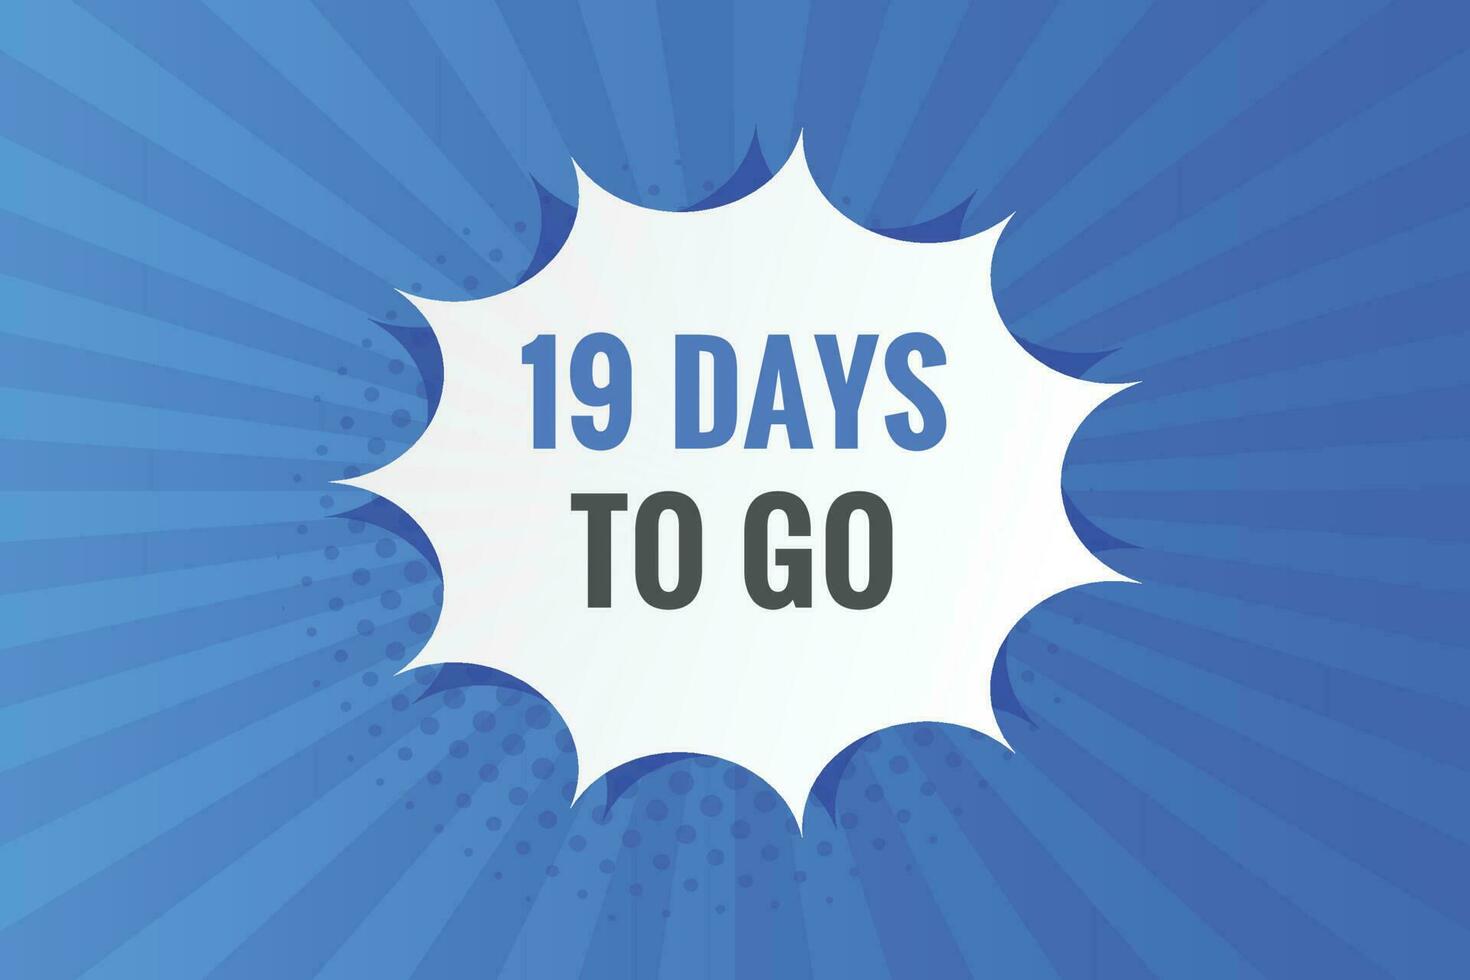 19 days to go text web button. Countdown left 19 day to go banner label vector